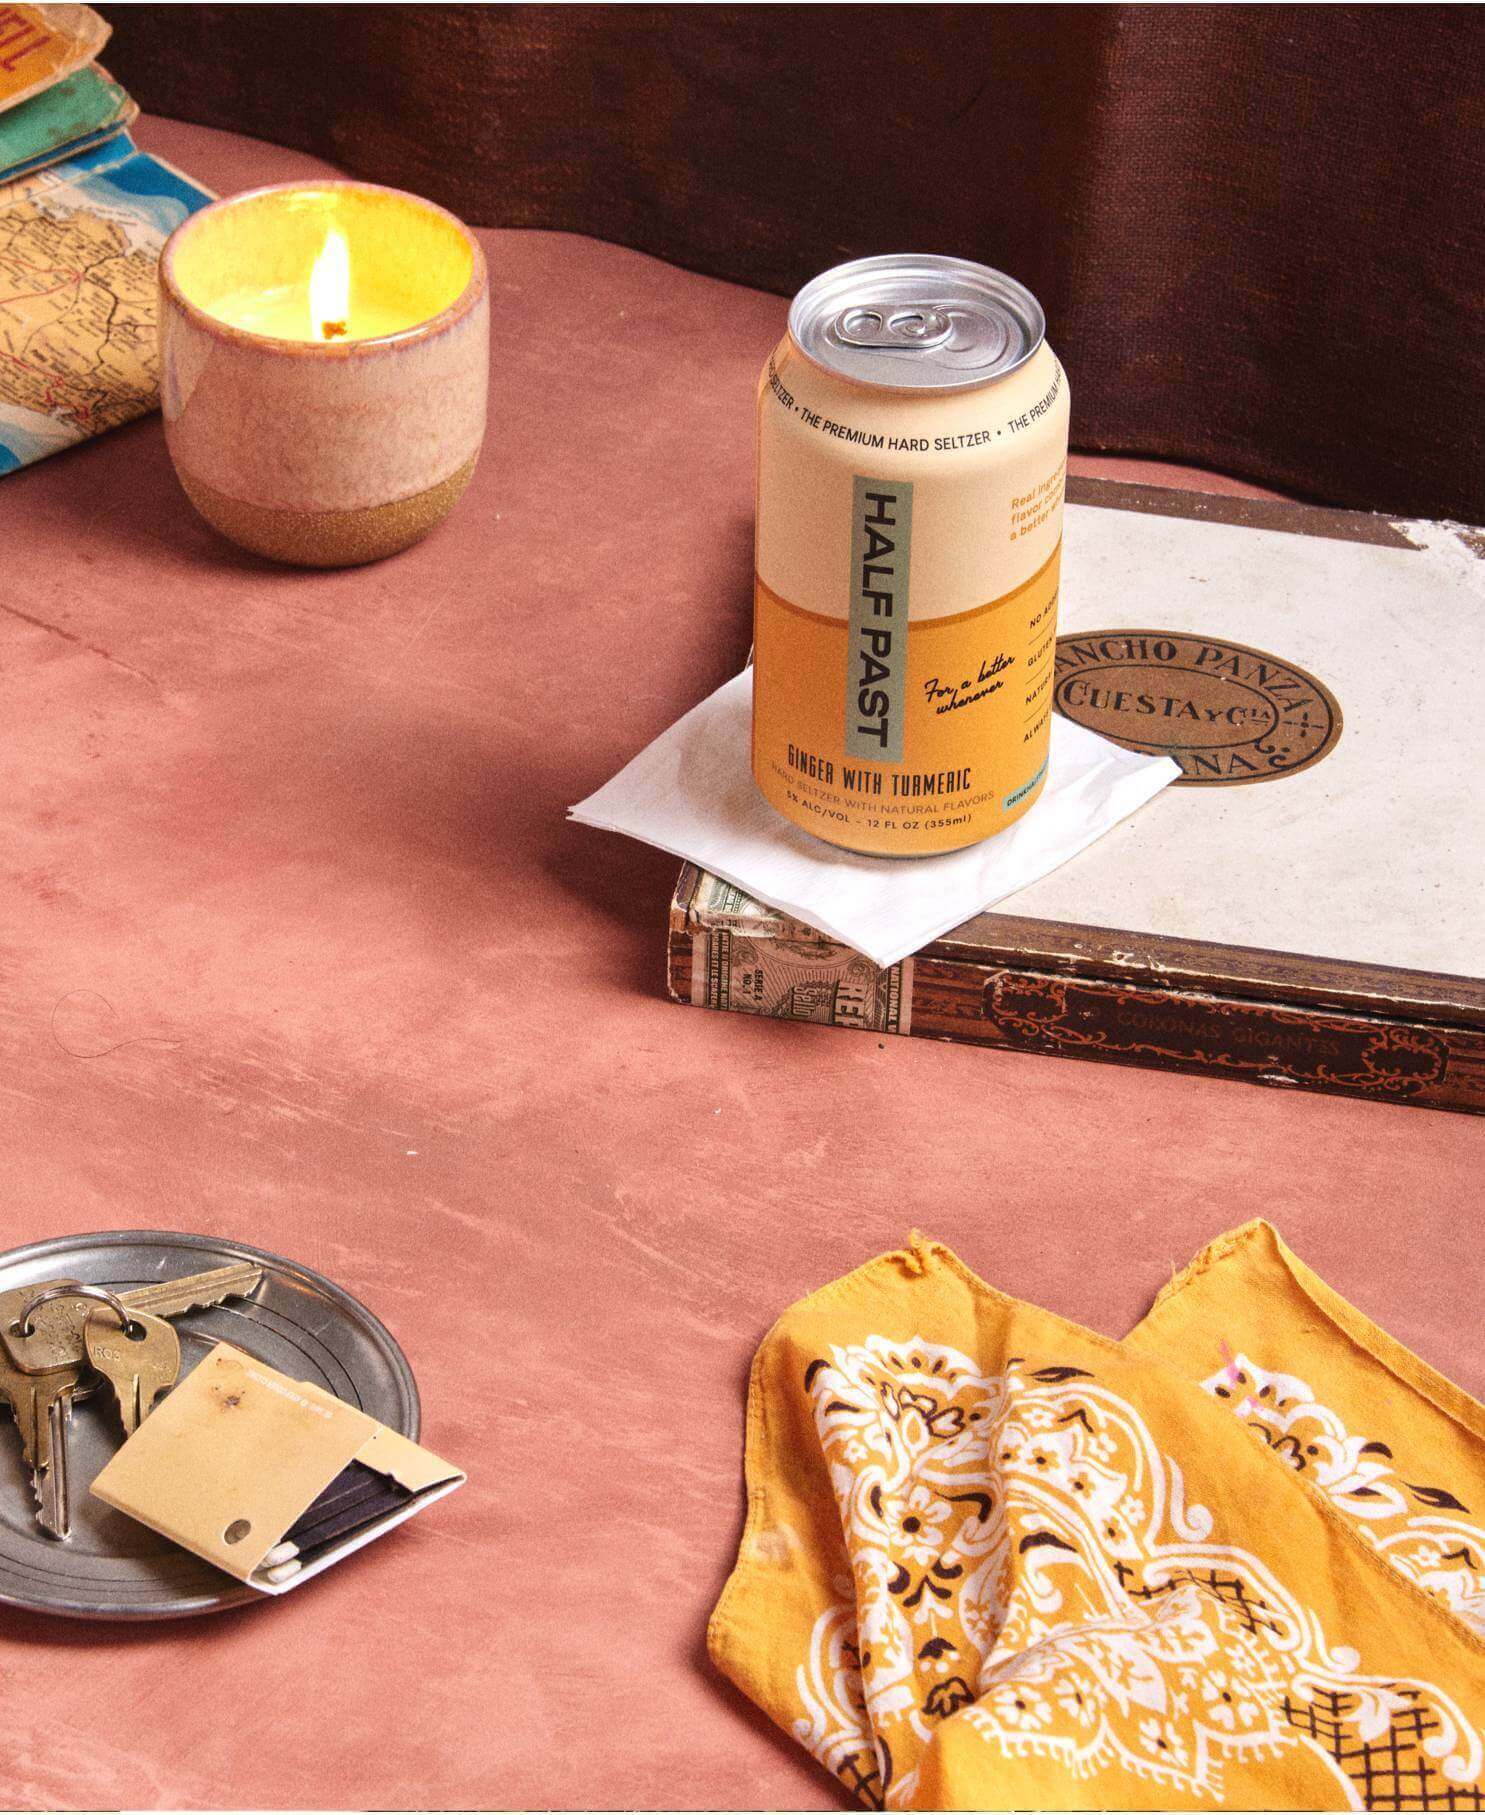 Lifestyle Photo of Ginger with Turmeric Flavored Half Past Hard Seltzer Can on a Table with a Candle and Bandana